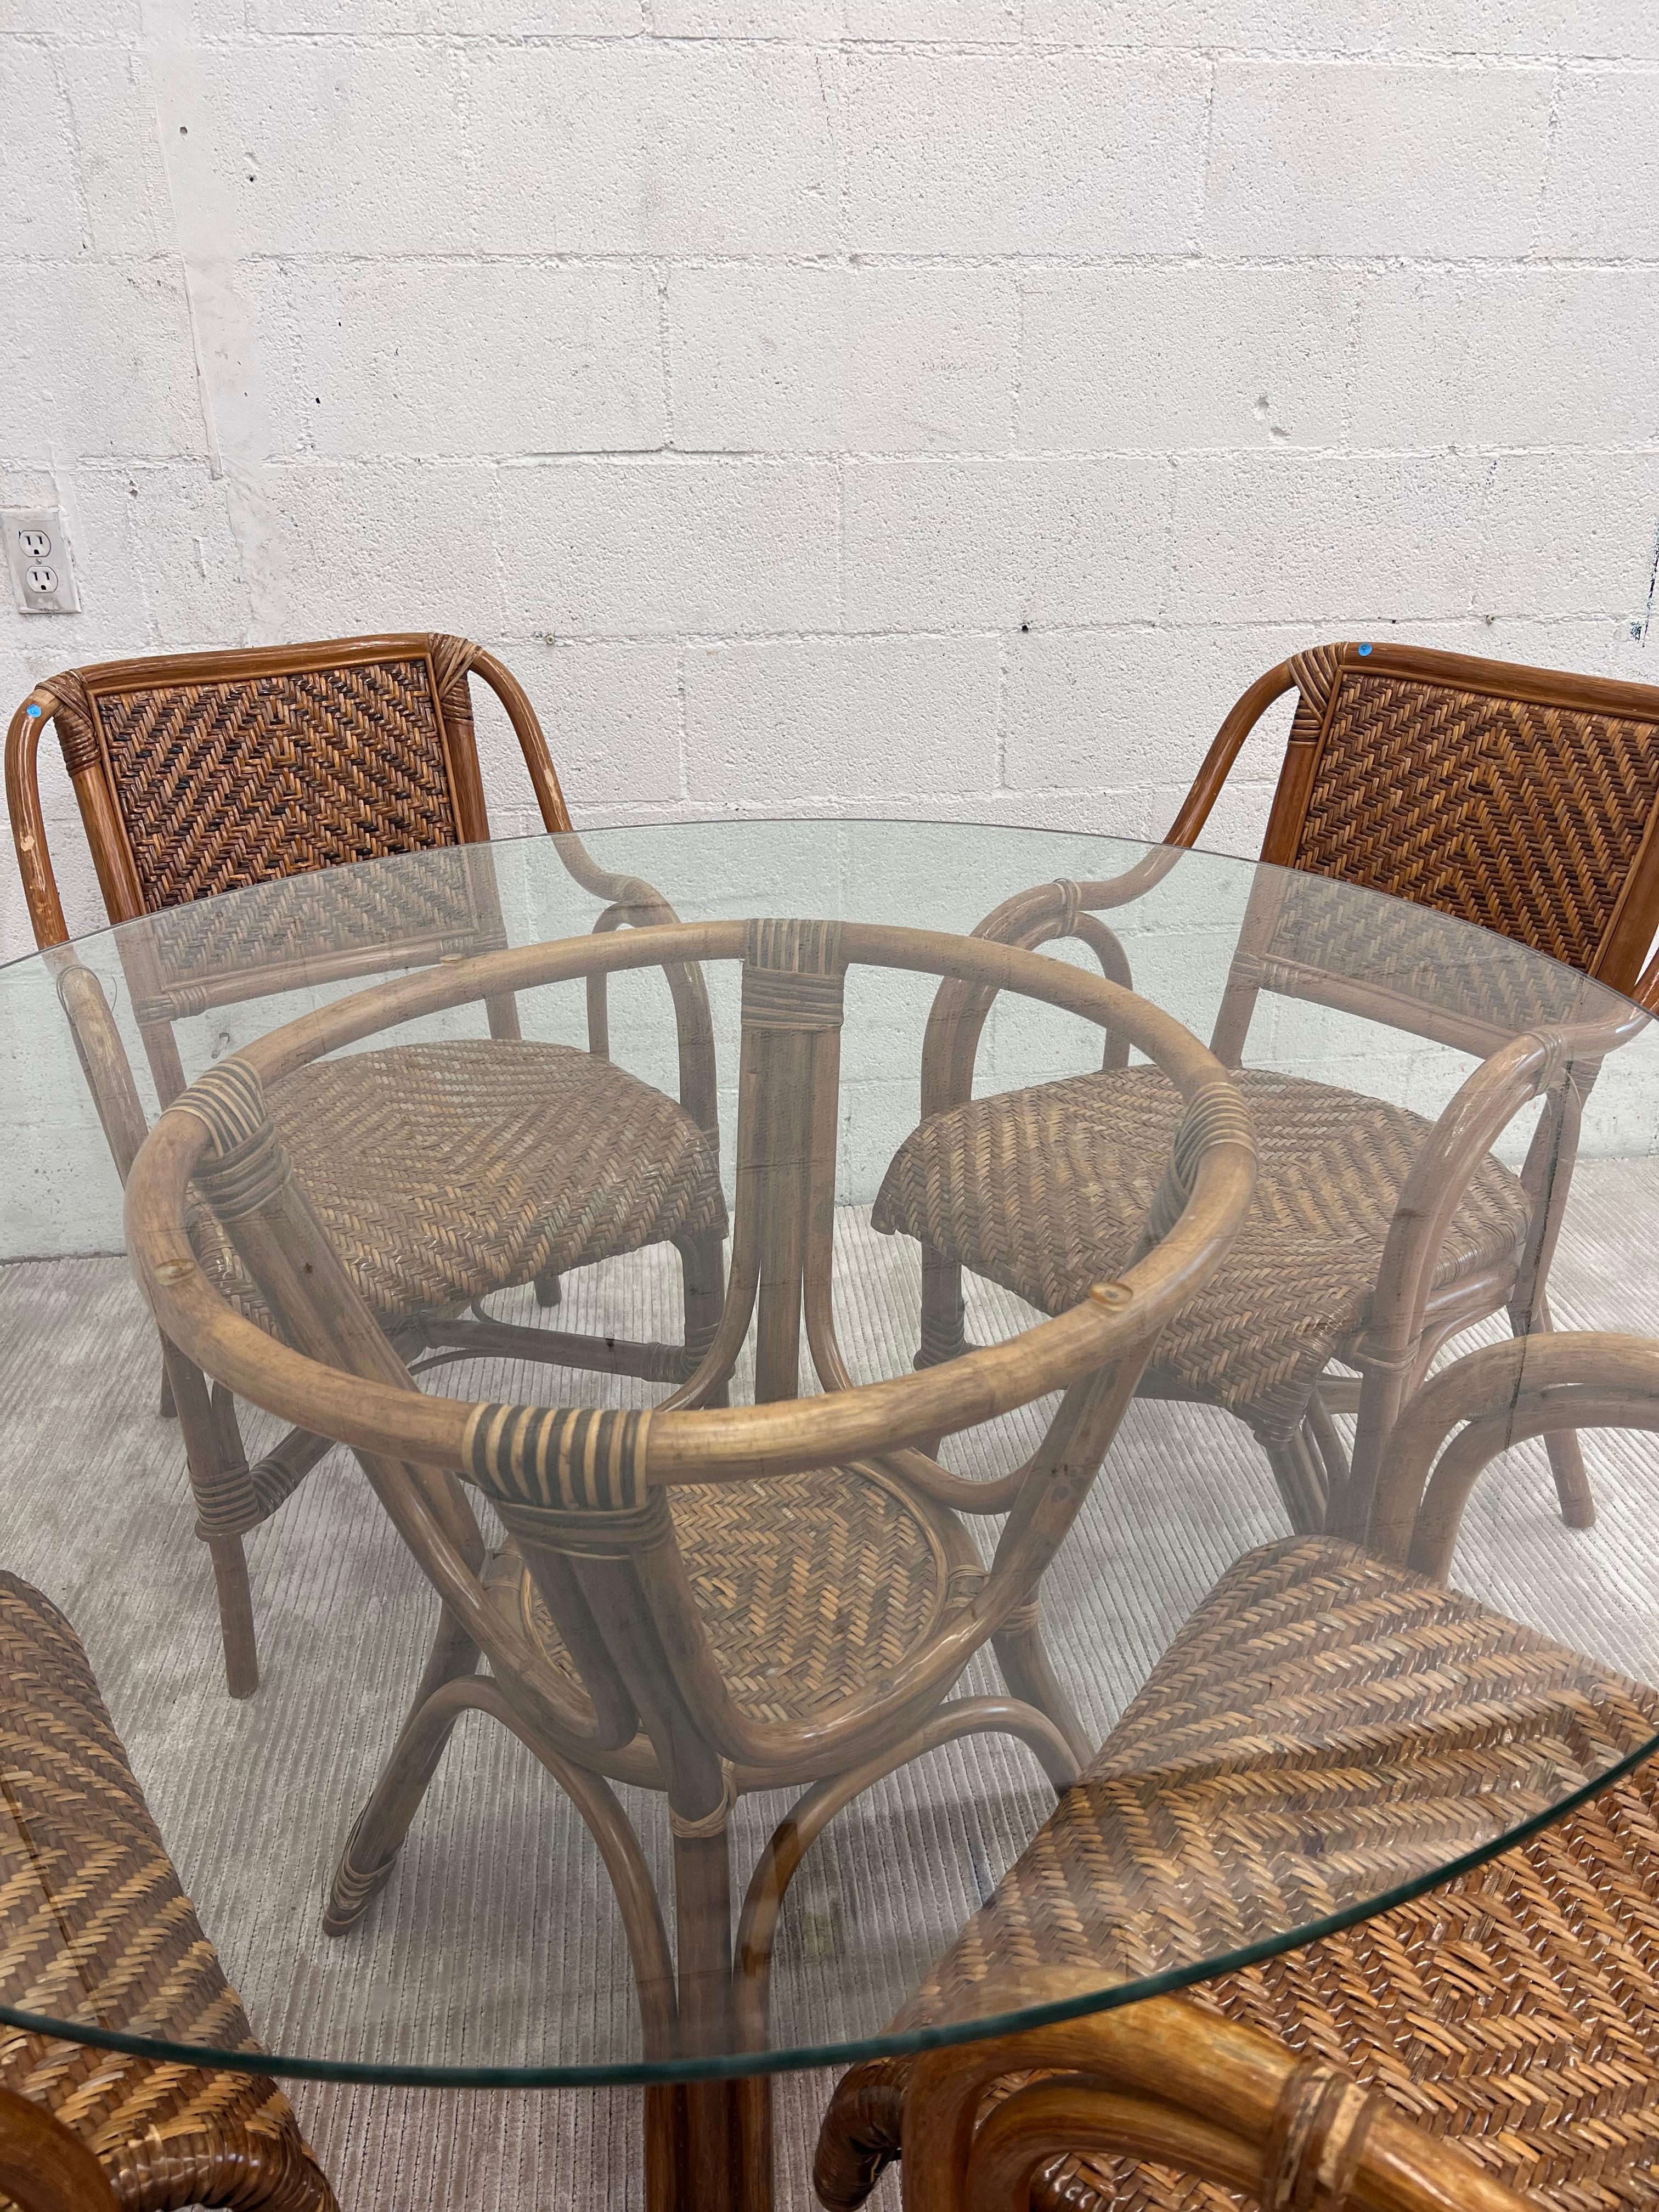 Vintage Bamboo Rattan Wicker Dining Table
Bamboo pedestal/center table. Organic whiplash curved bamboo. Created in the late 20th century. 

Matching chairs also available 